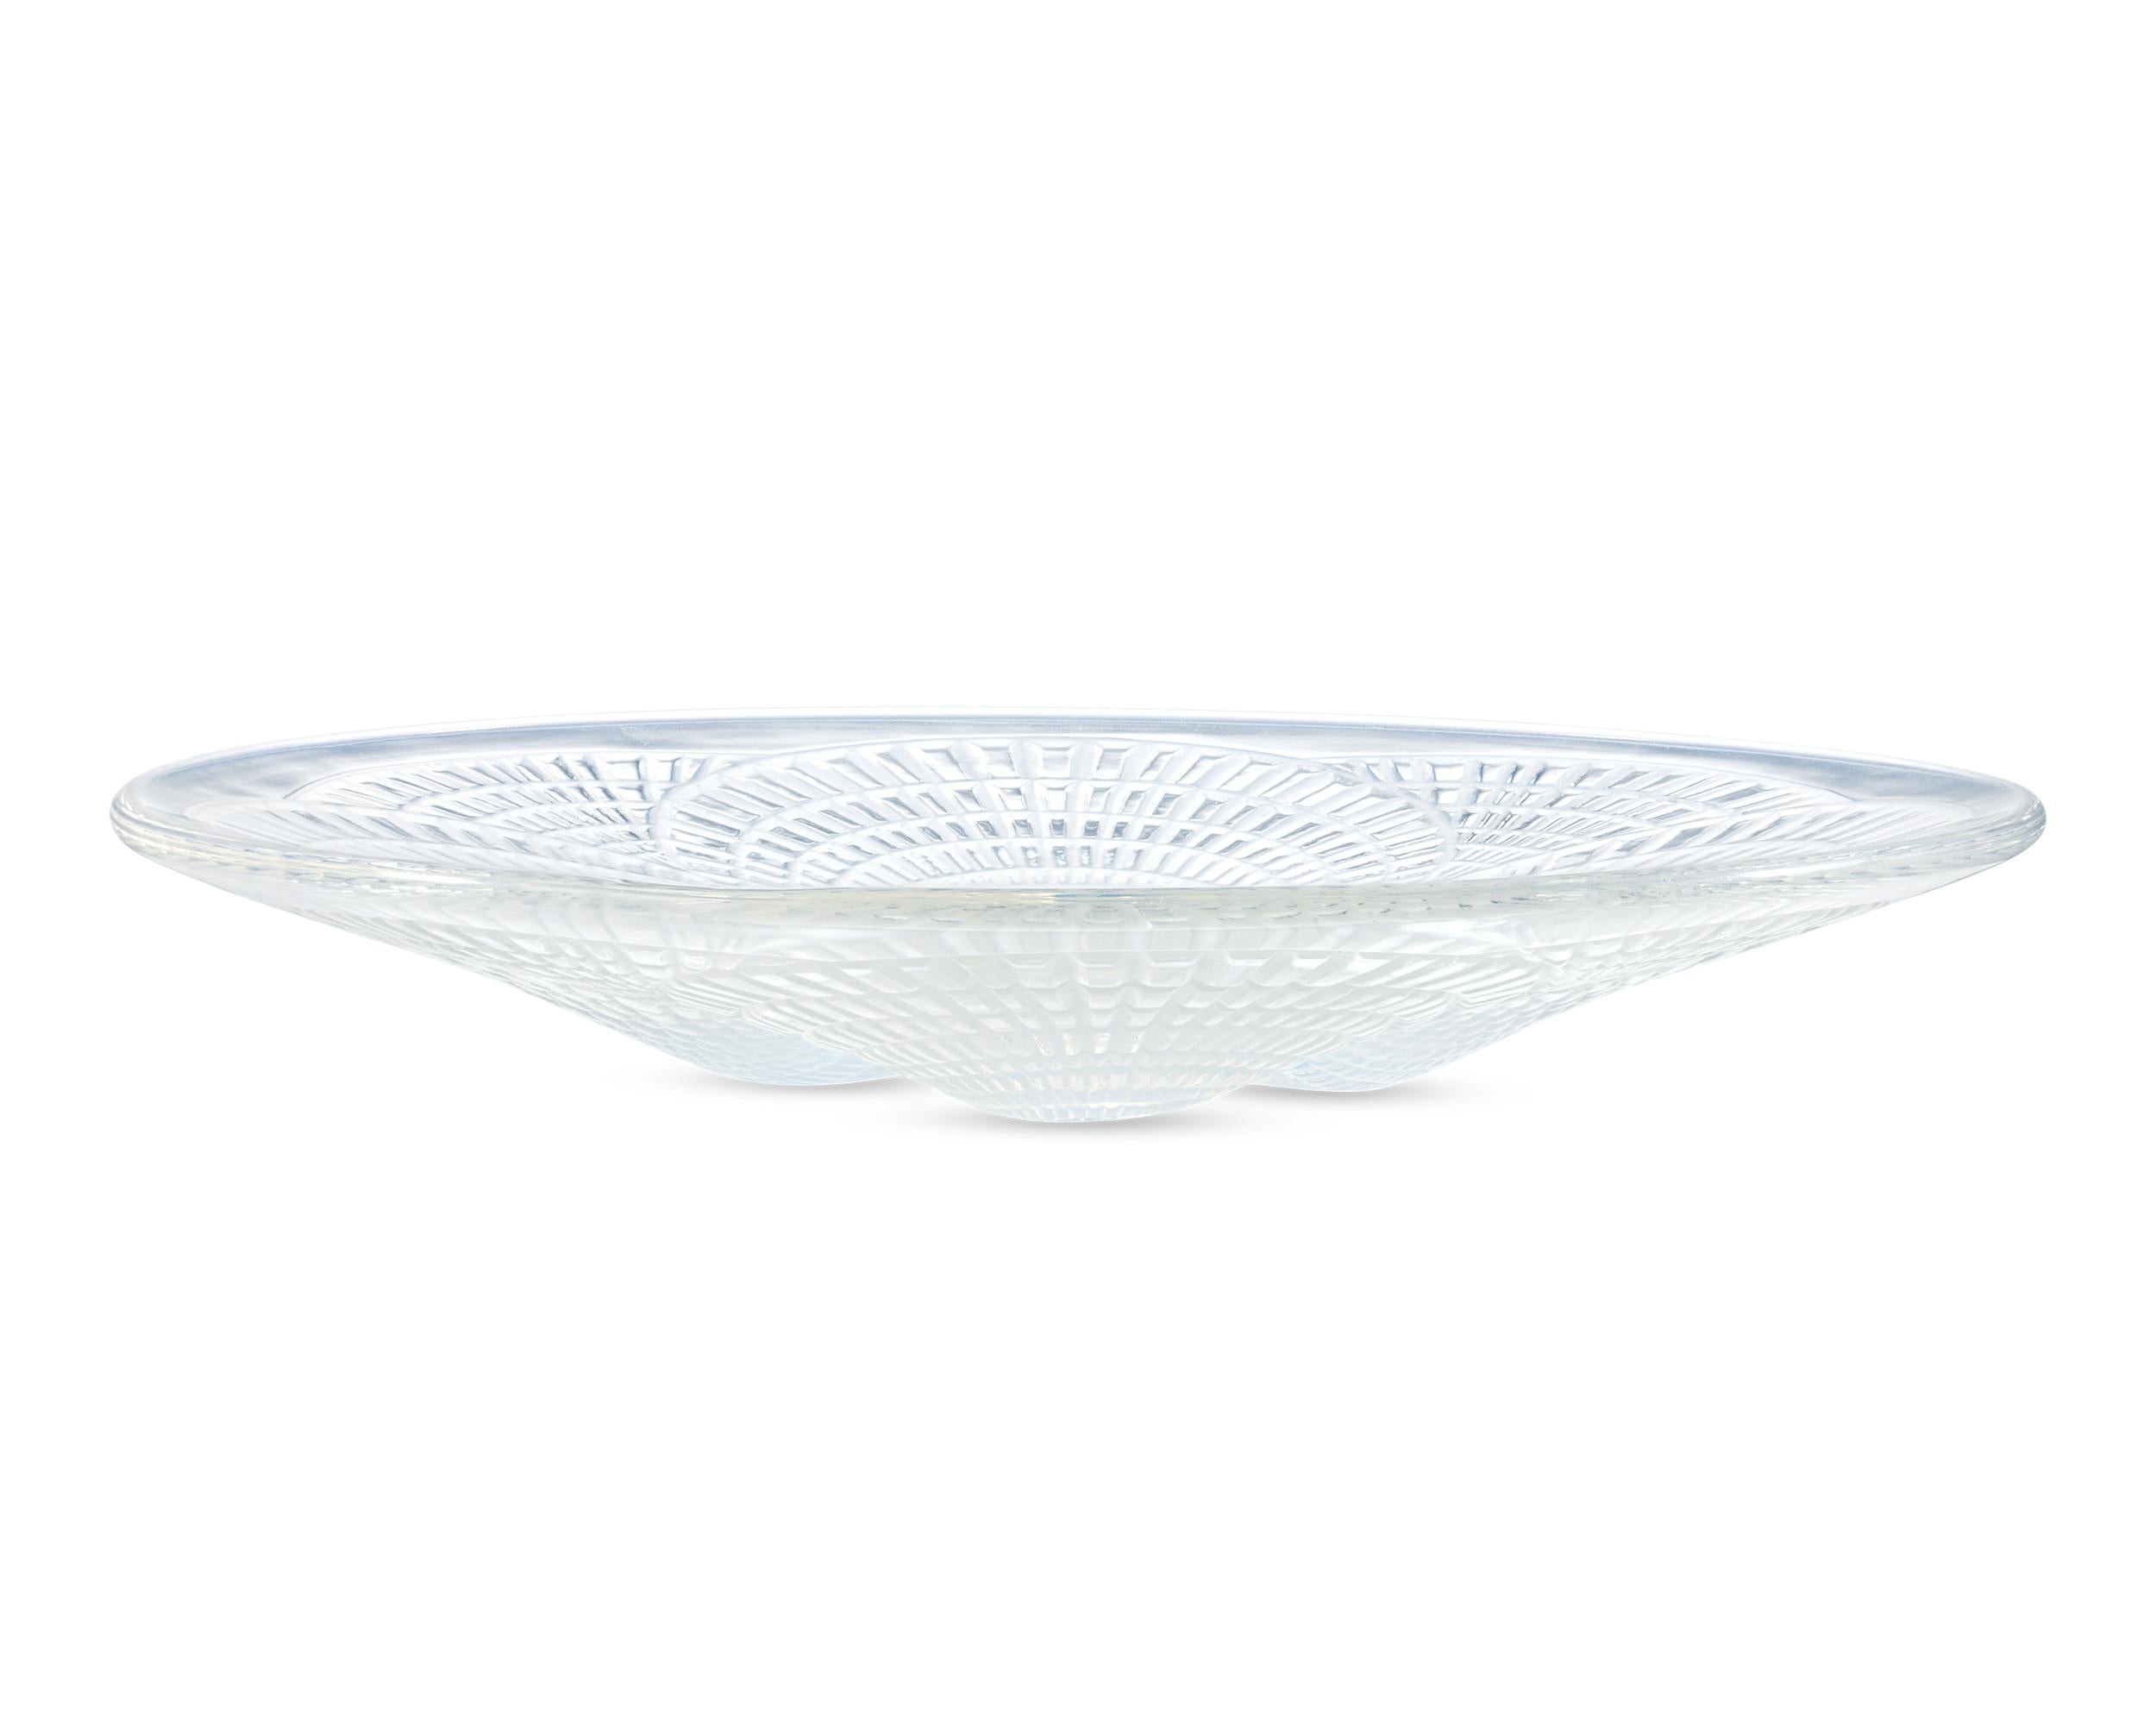 This classic design from René Lalique features four scallop shells. Called the Coquilles motif, it was first designed by René Lalique in 1924. This dish exudes the elegance and artistry of Lalique's most renowned designs.

Lalique remains one of the